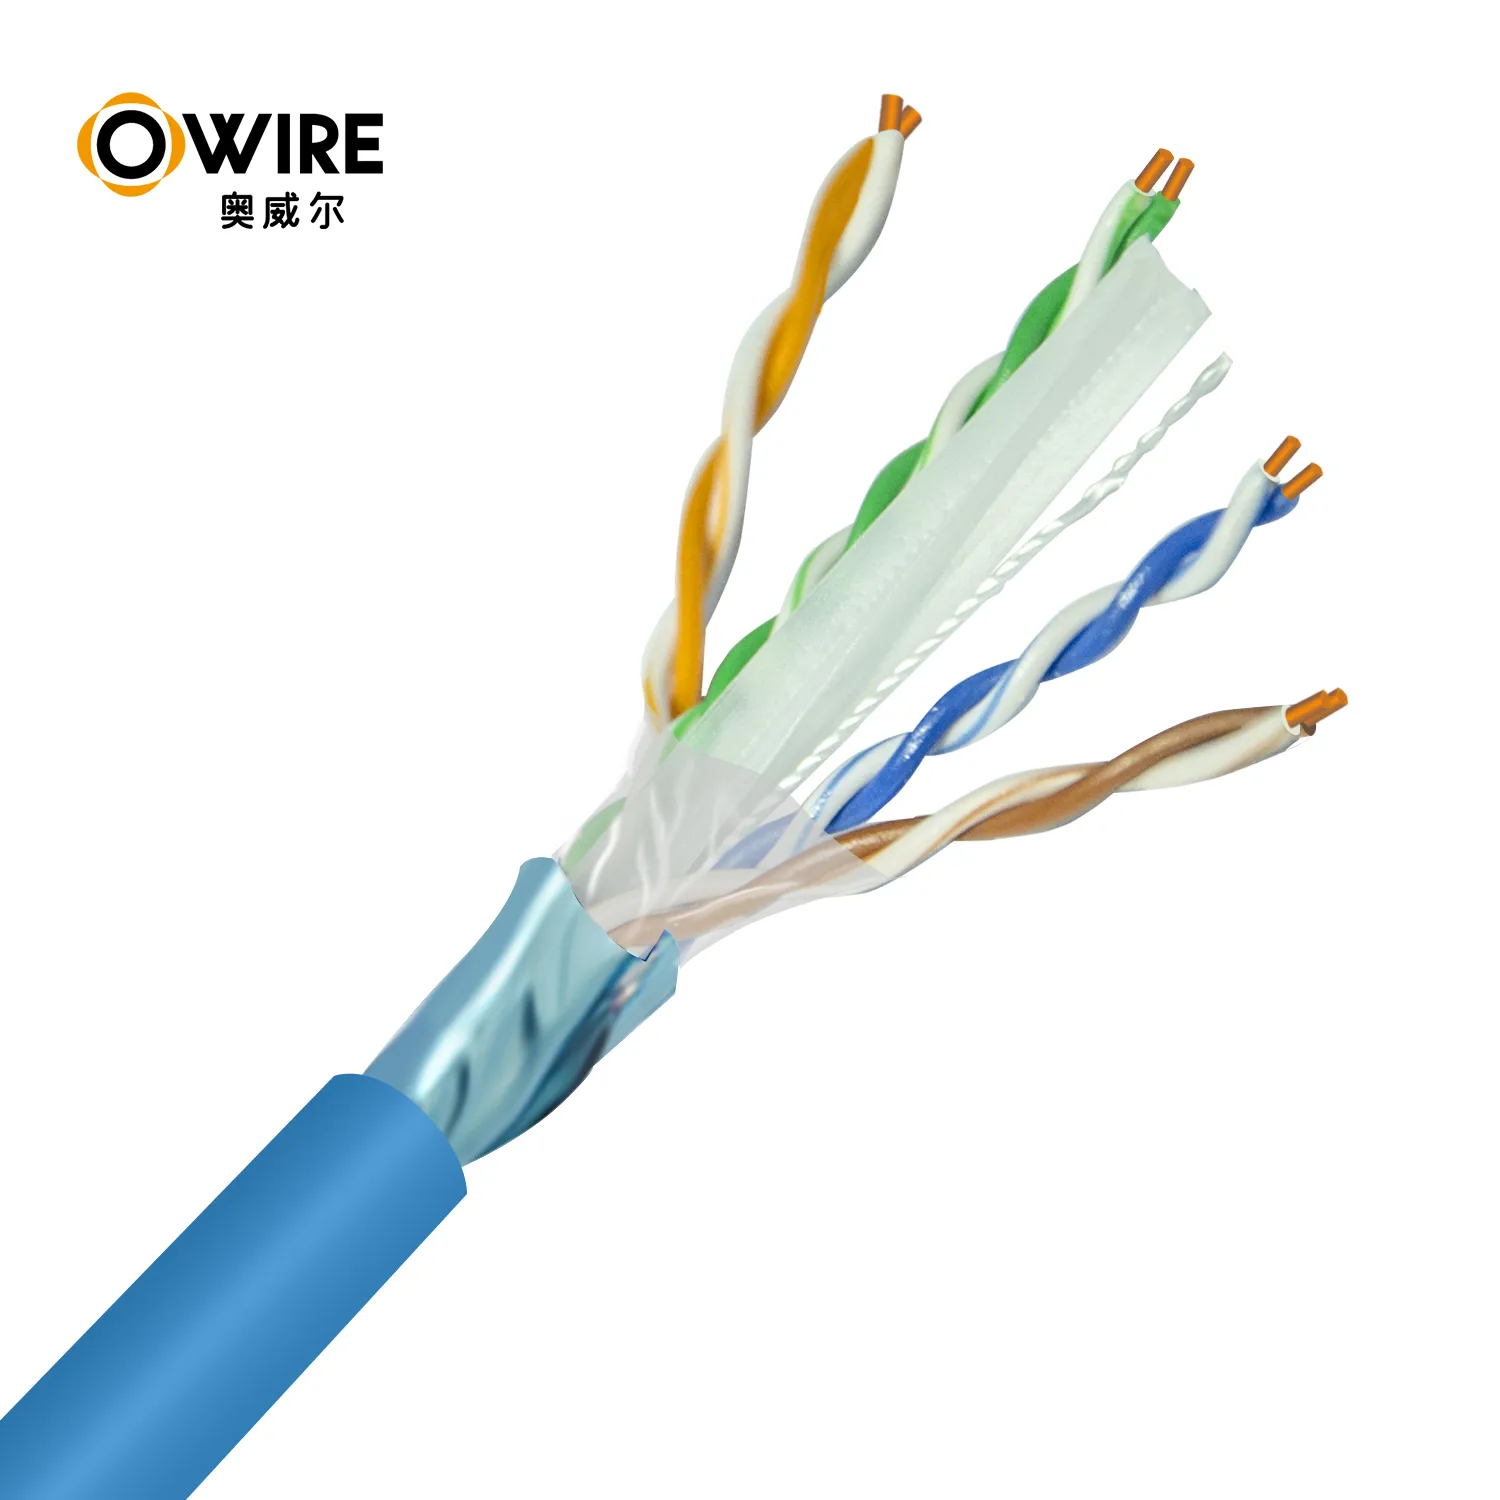 Owire Solid F/UTP 305m Box 1000Ft Outdoor Jelly Filled Ftp Cat6 Cable